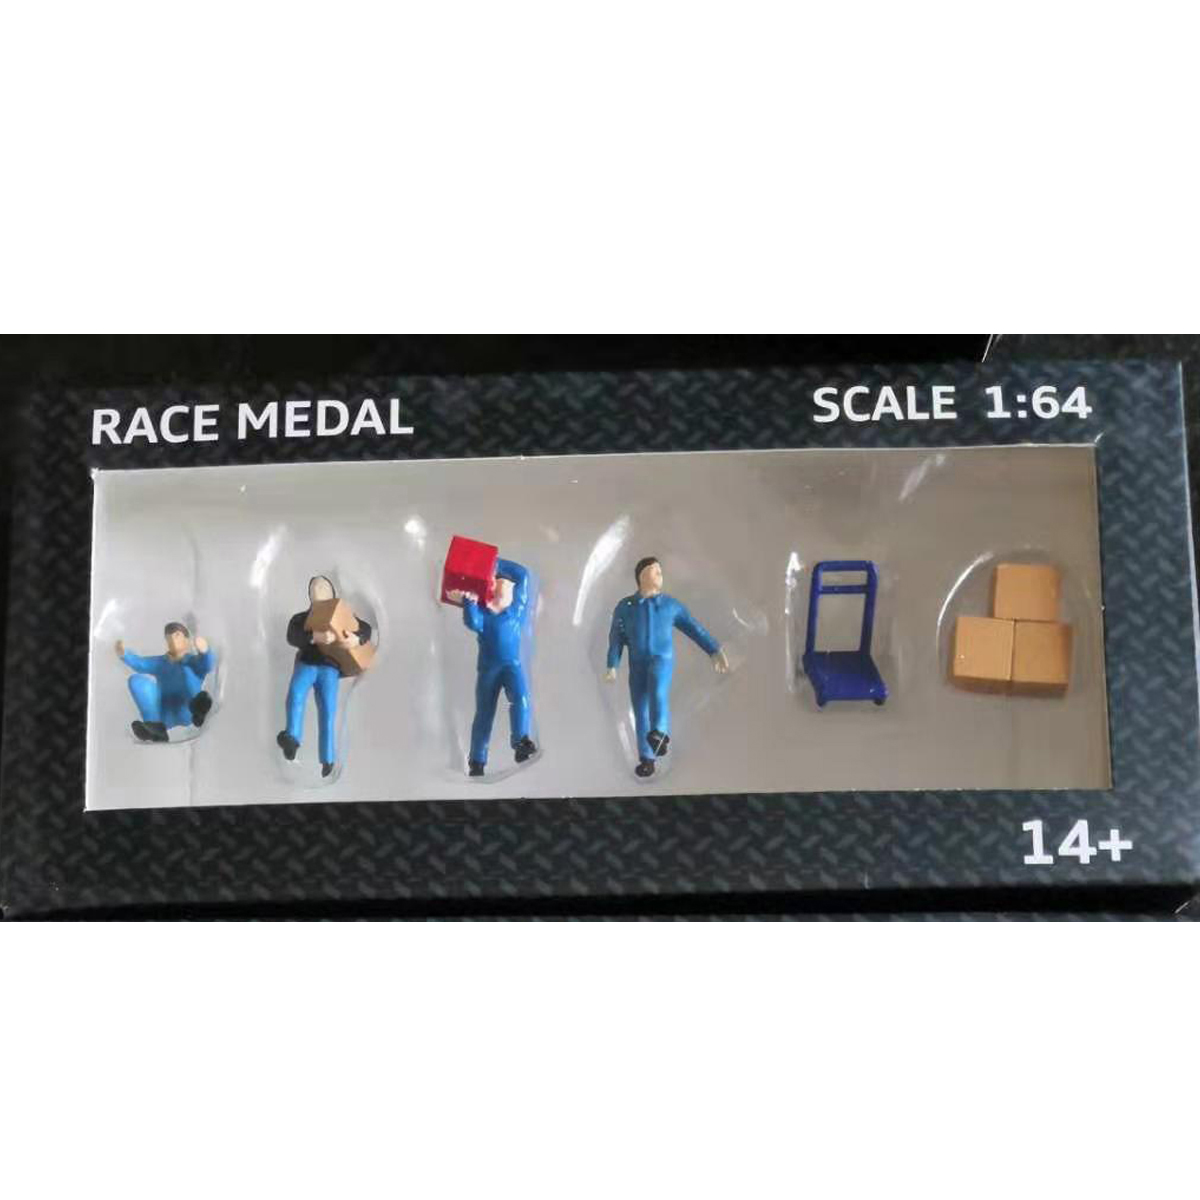 

RM 1:64 Scale Figures Diorama To Move The Box Freight Courier Stevedore Model